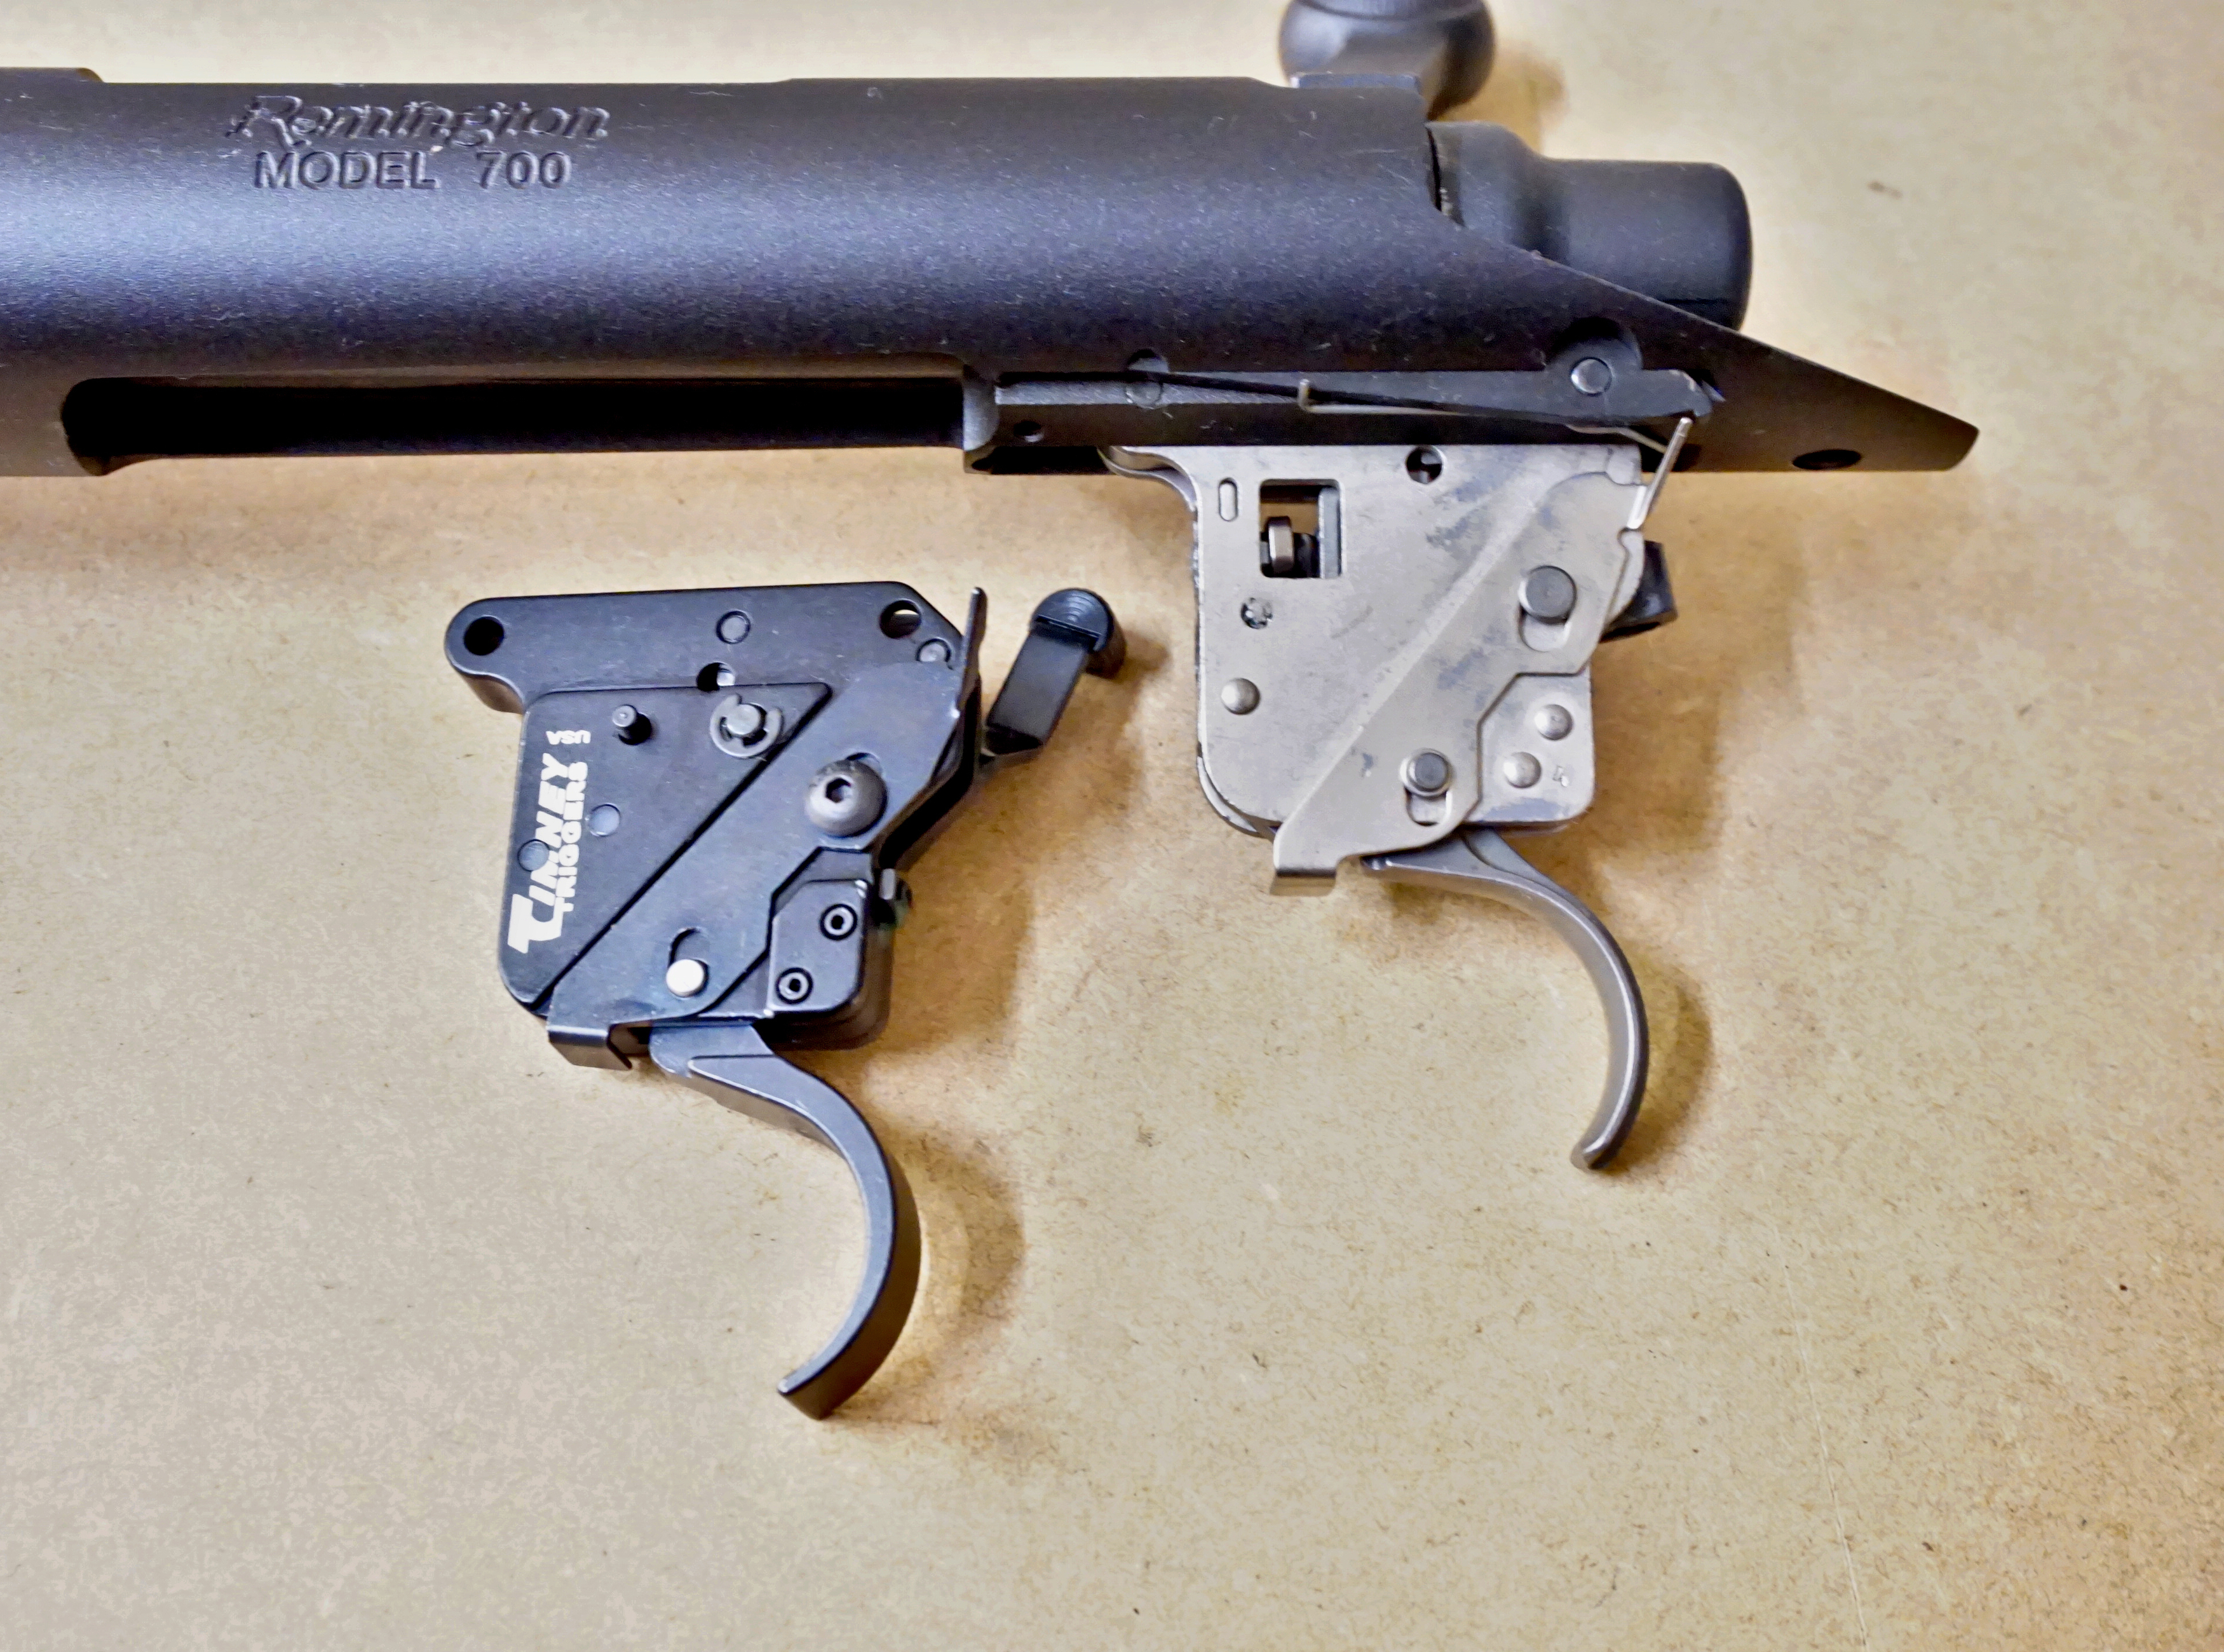 Trigger Adjustment or Replacement